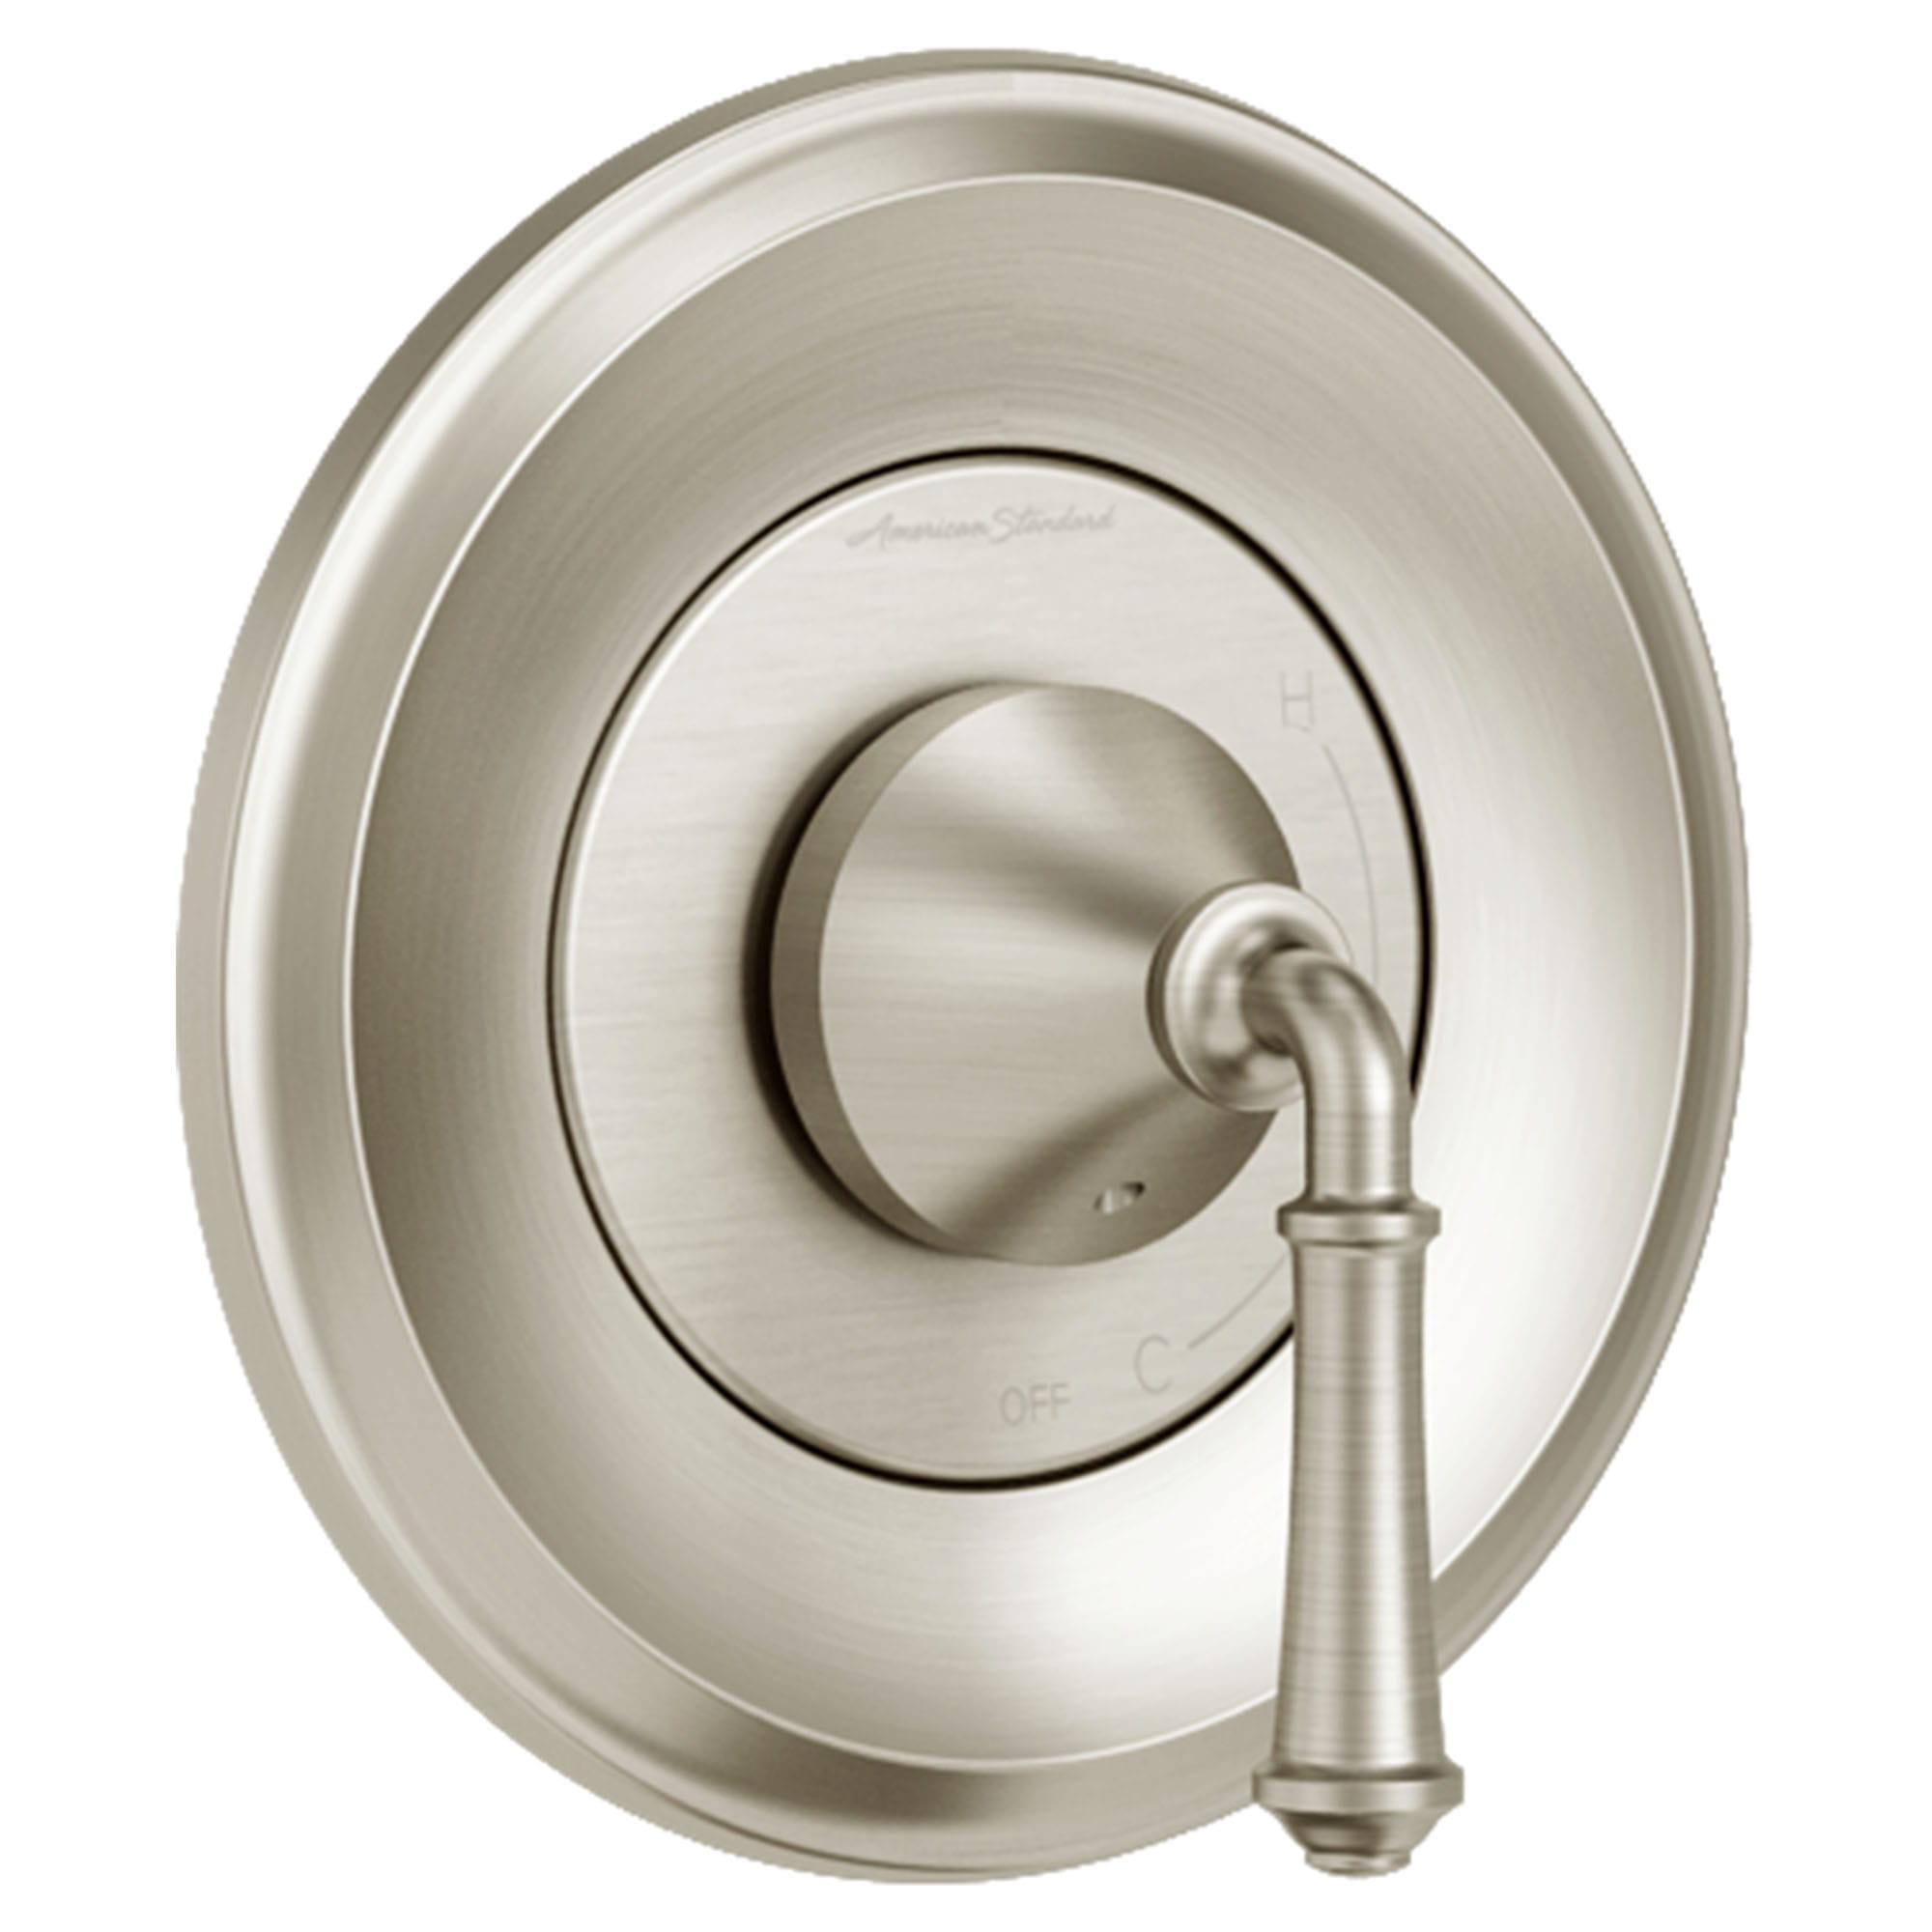 Delancey Valve Only Trim Kit With Lever Handle BRUSHED NICKEL